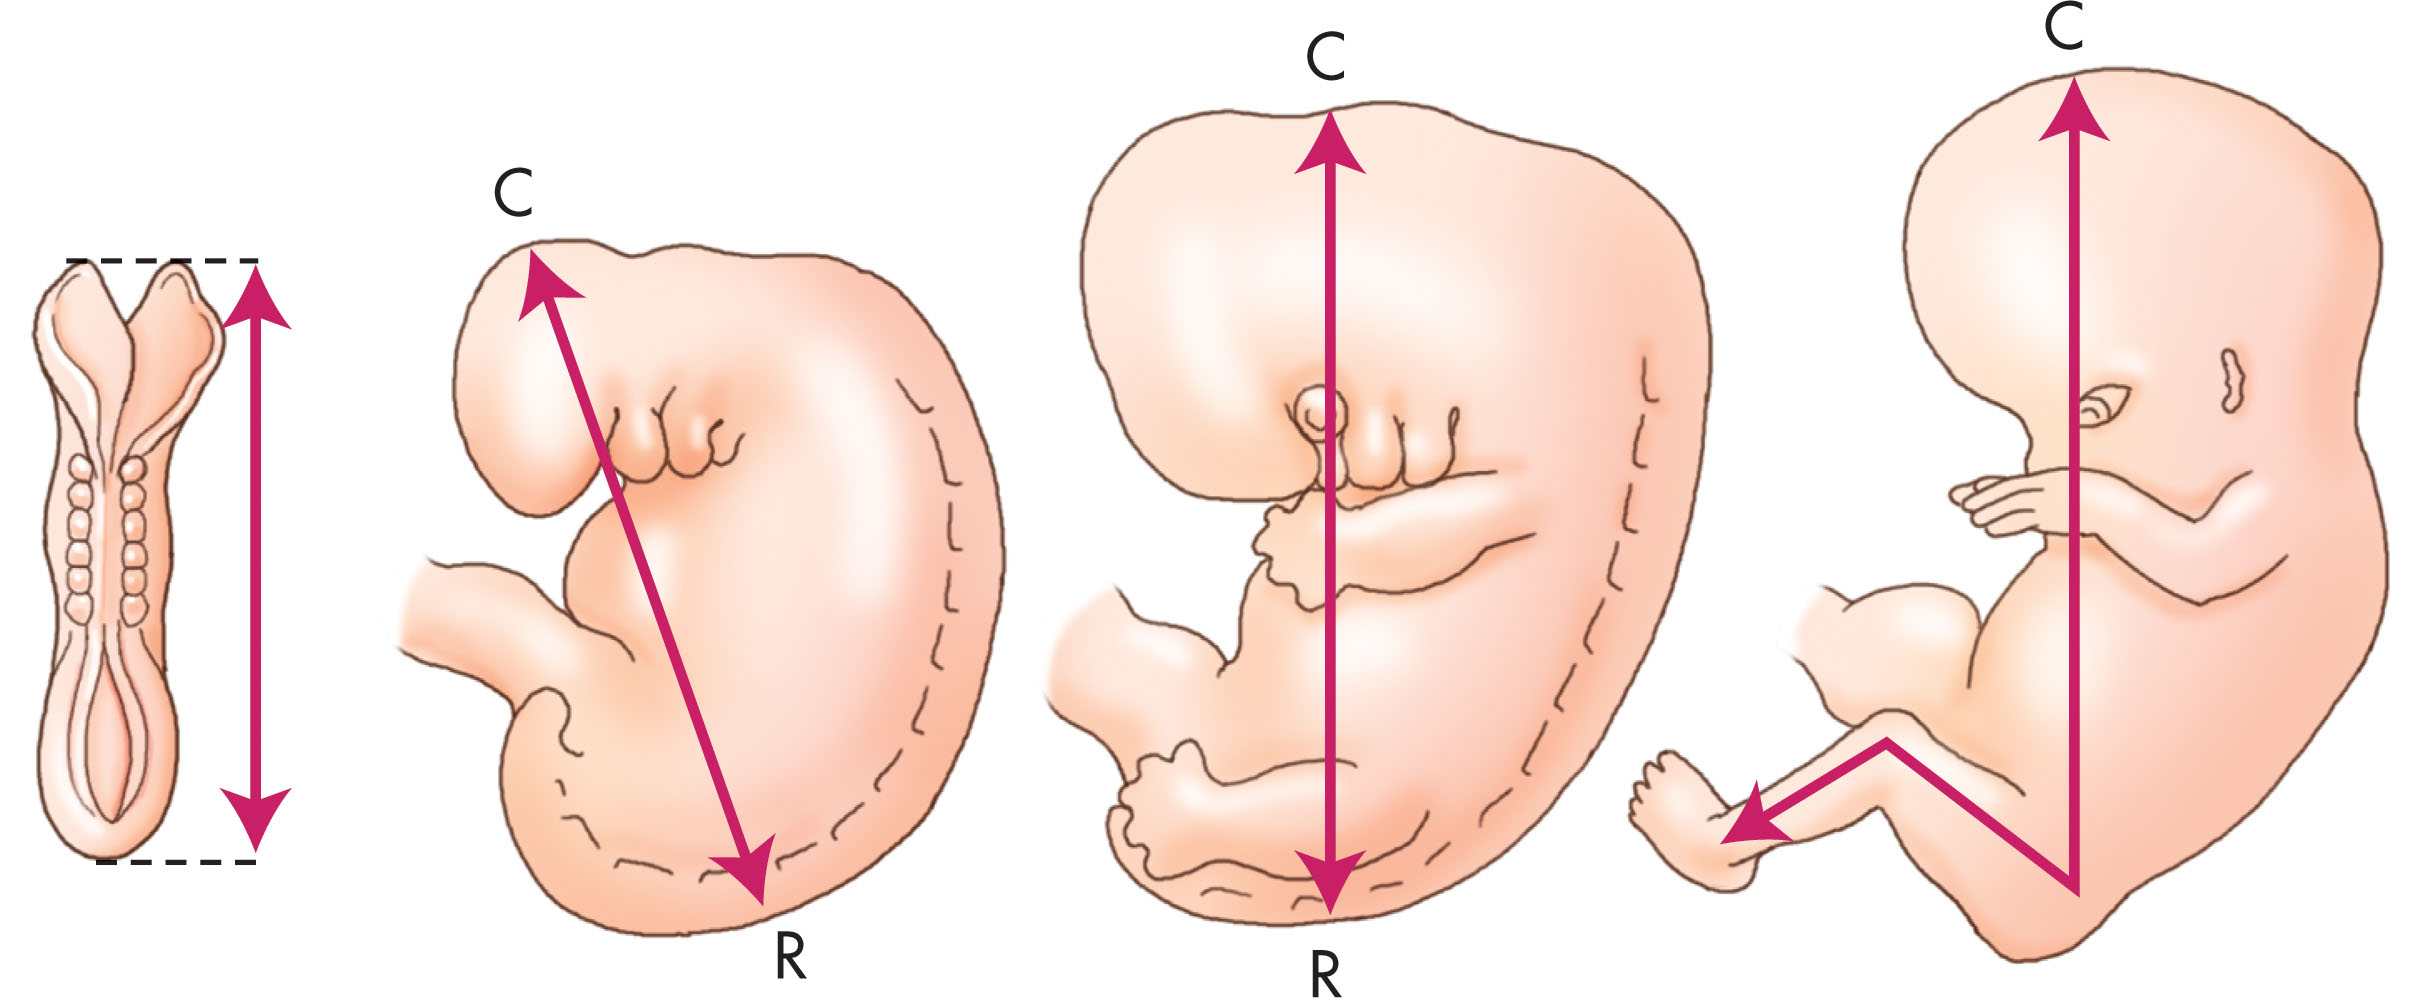 Fig. 49.5, The relationship of neural tube development to crown-rump length in the first trimester. Note the size of the embryo’s head relative to the body. At the beginning of the fetal period in the late first trimester, the embryo’s head measures almost half of the crown-rump length.